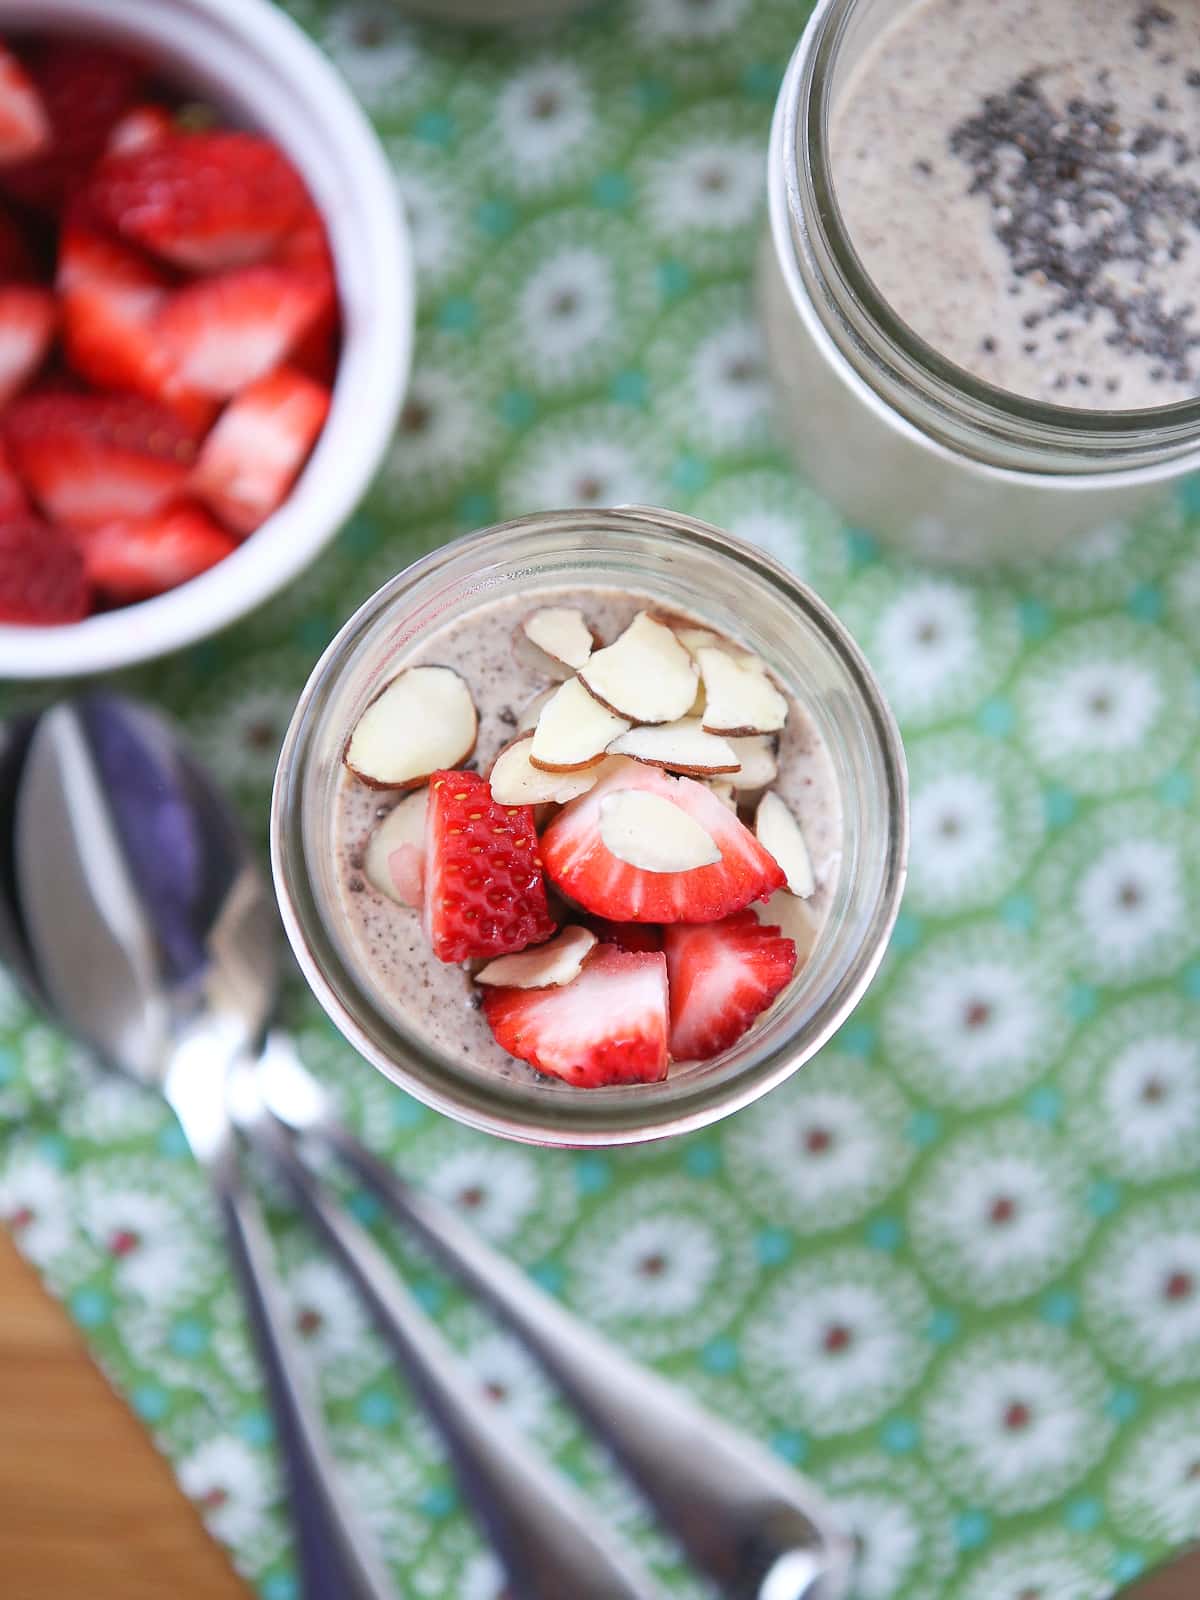 Cinnamon Peanut Butter Chia Seed Pudding - Aggie's Kitchen